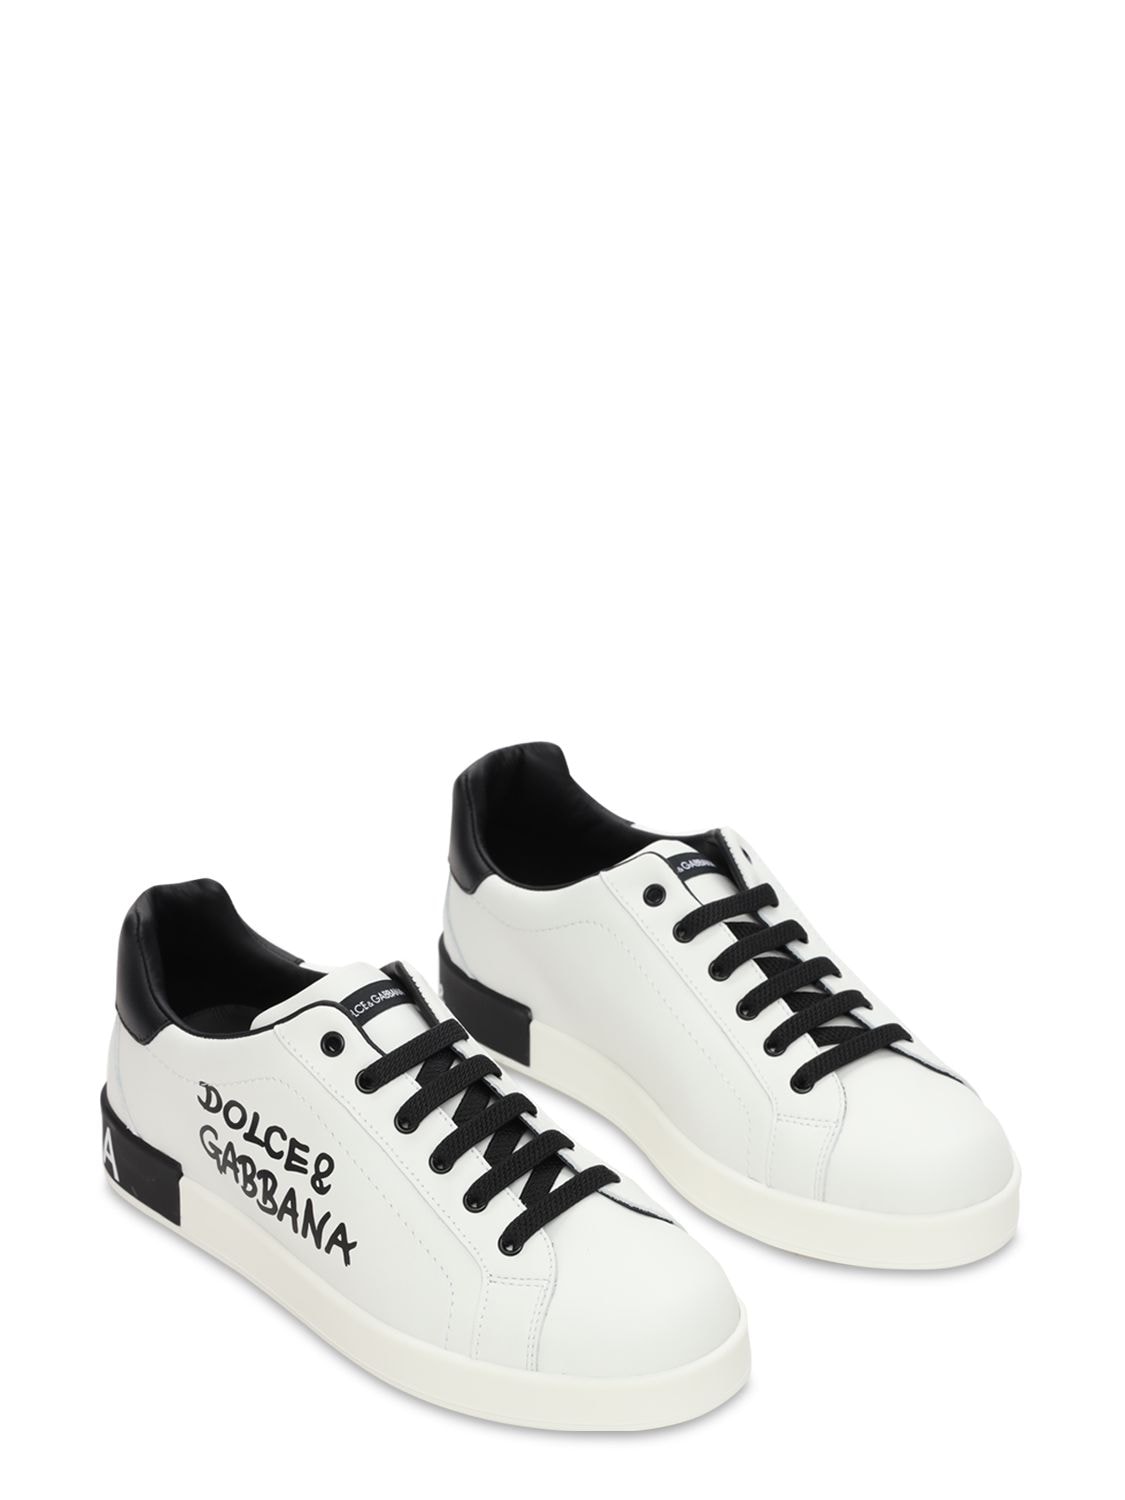 DOLCE & GABBANA LOGO PRINT LEATHER LACE-UP SNEAKERS,73I6T9009-SFDGNTC1